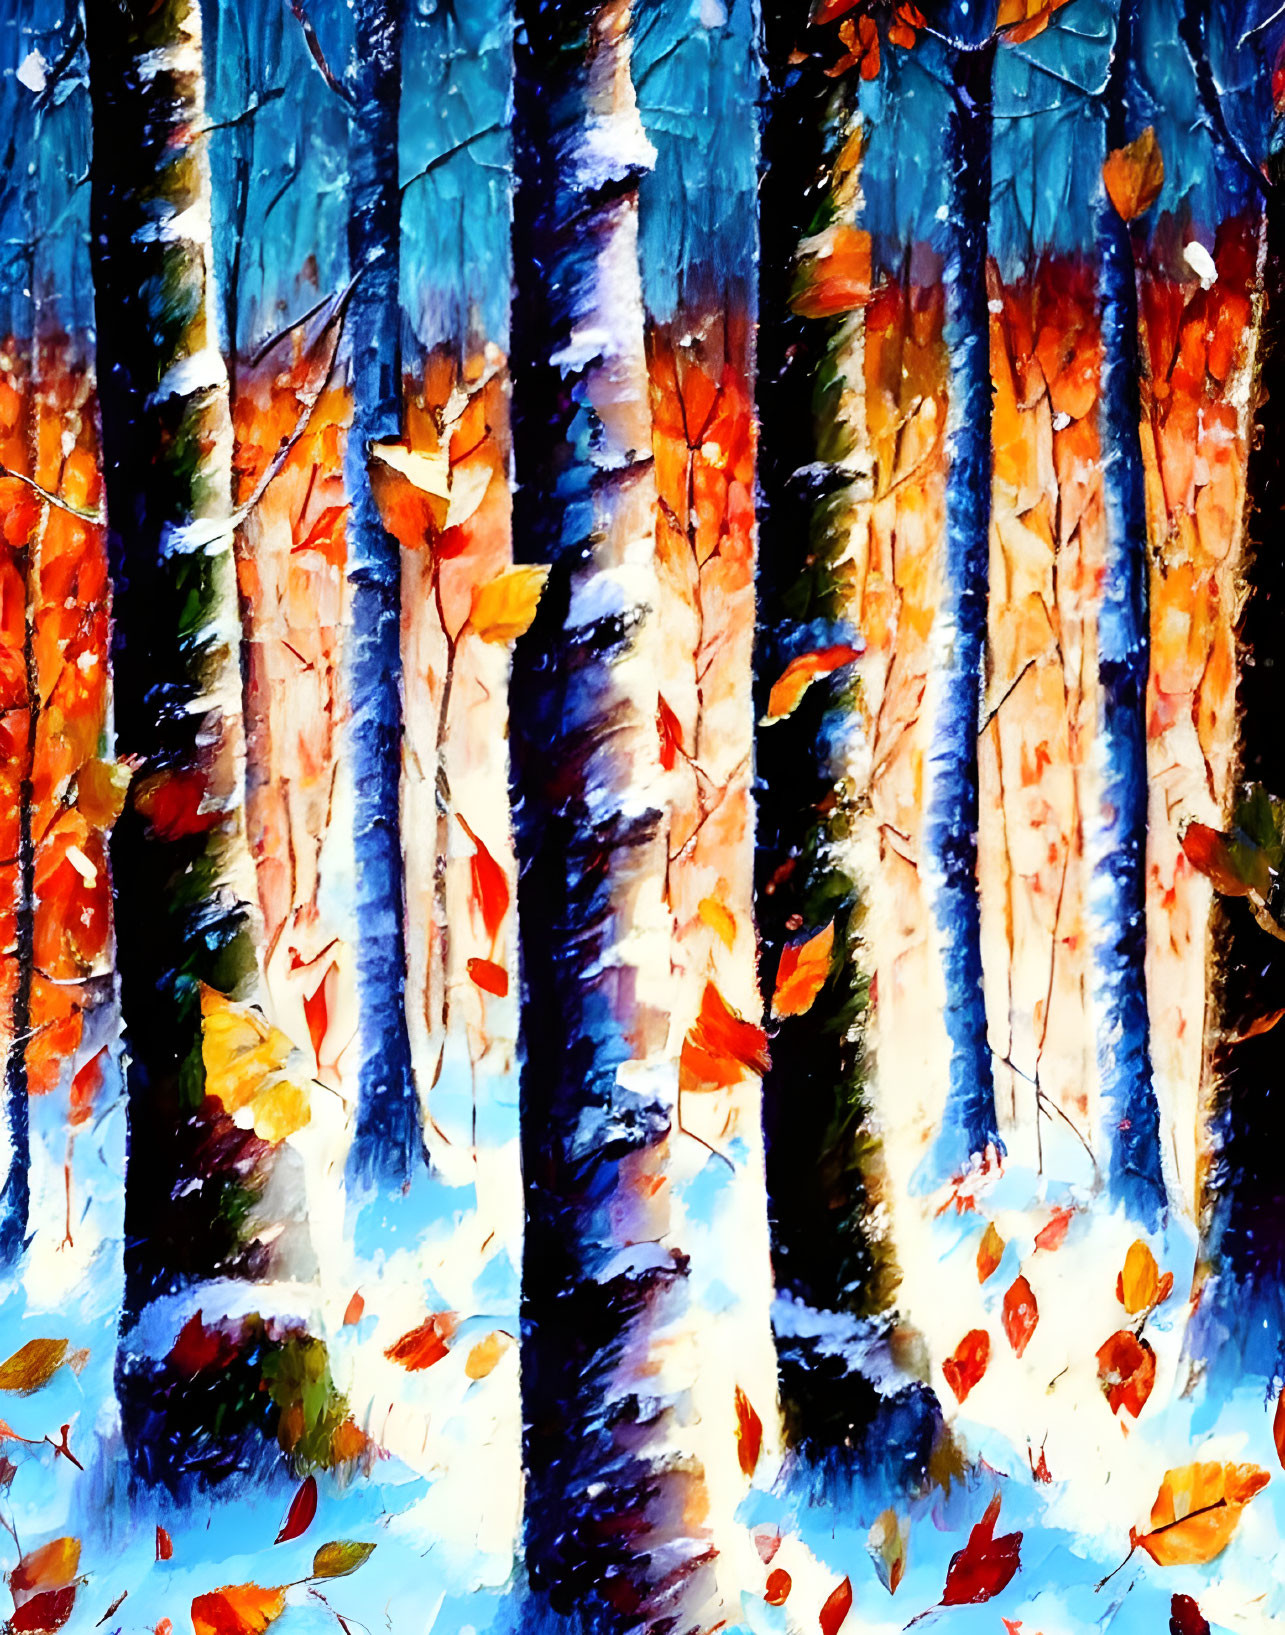 Vibrant impressionistic painting of autumn leaves in snowy forest